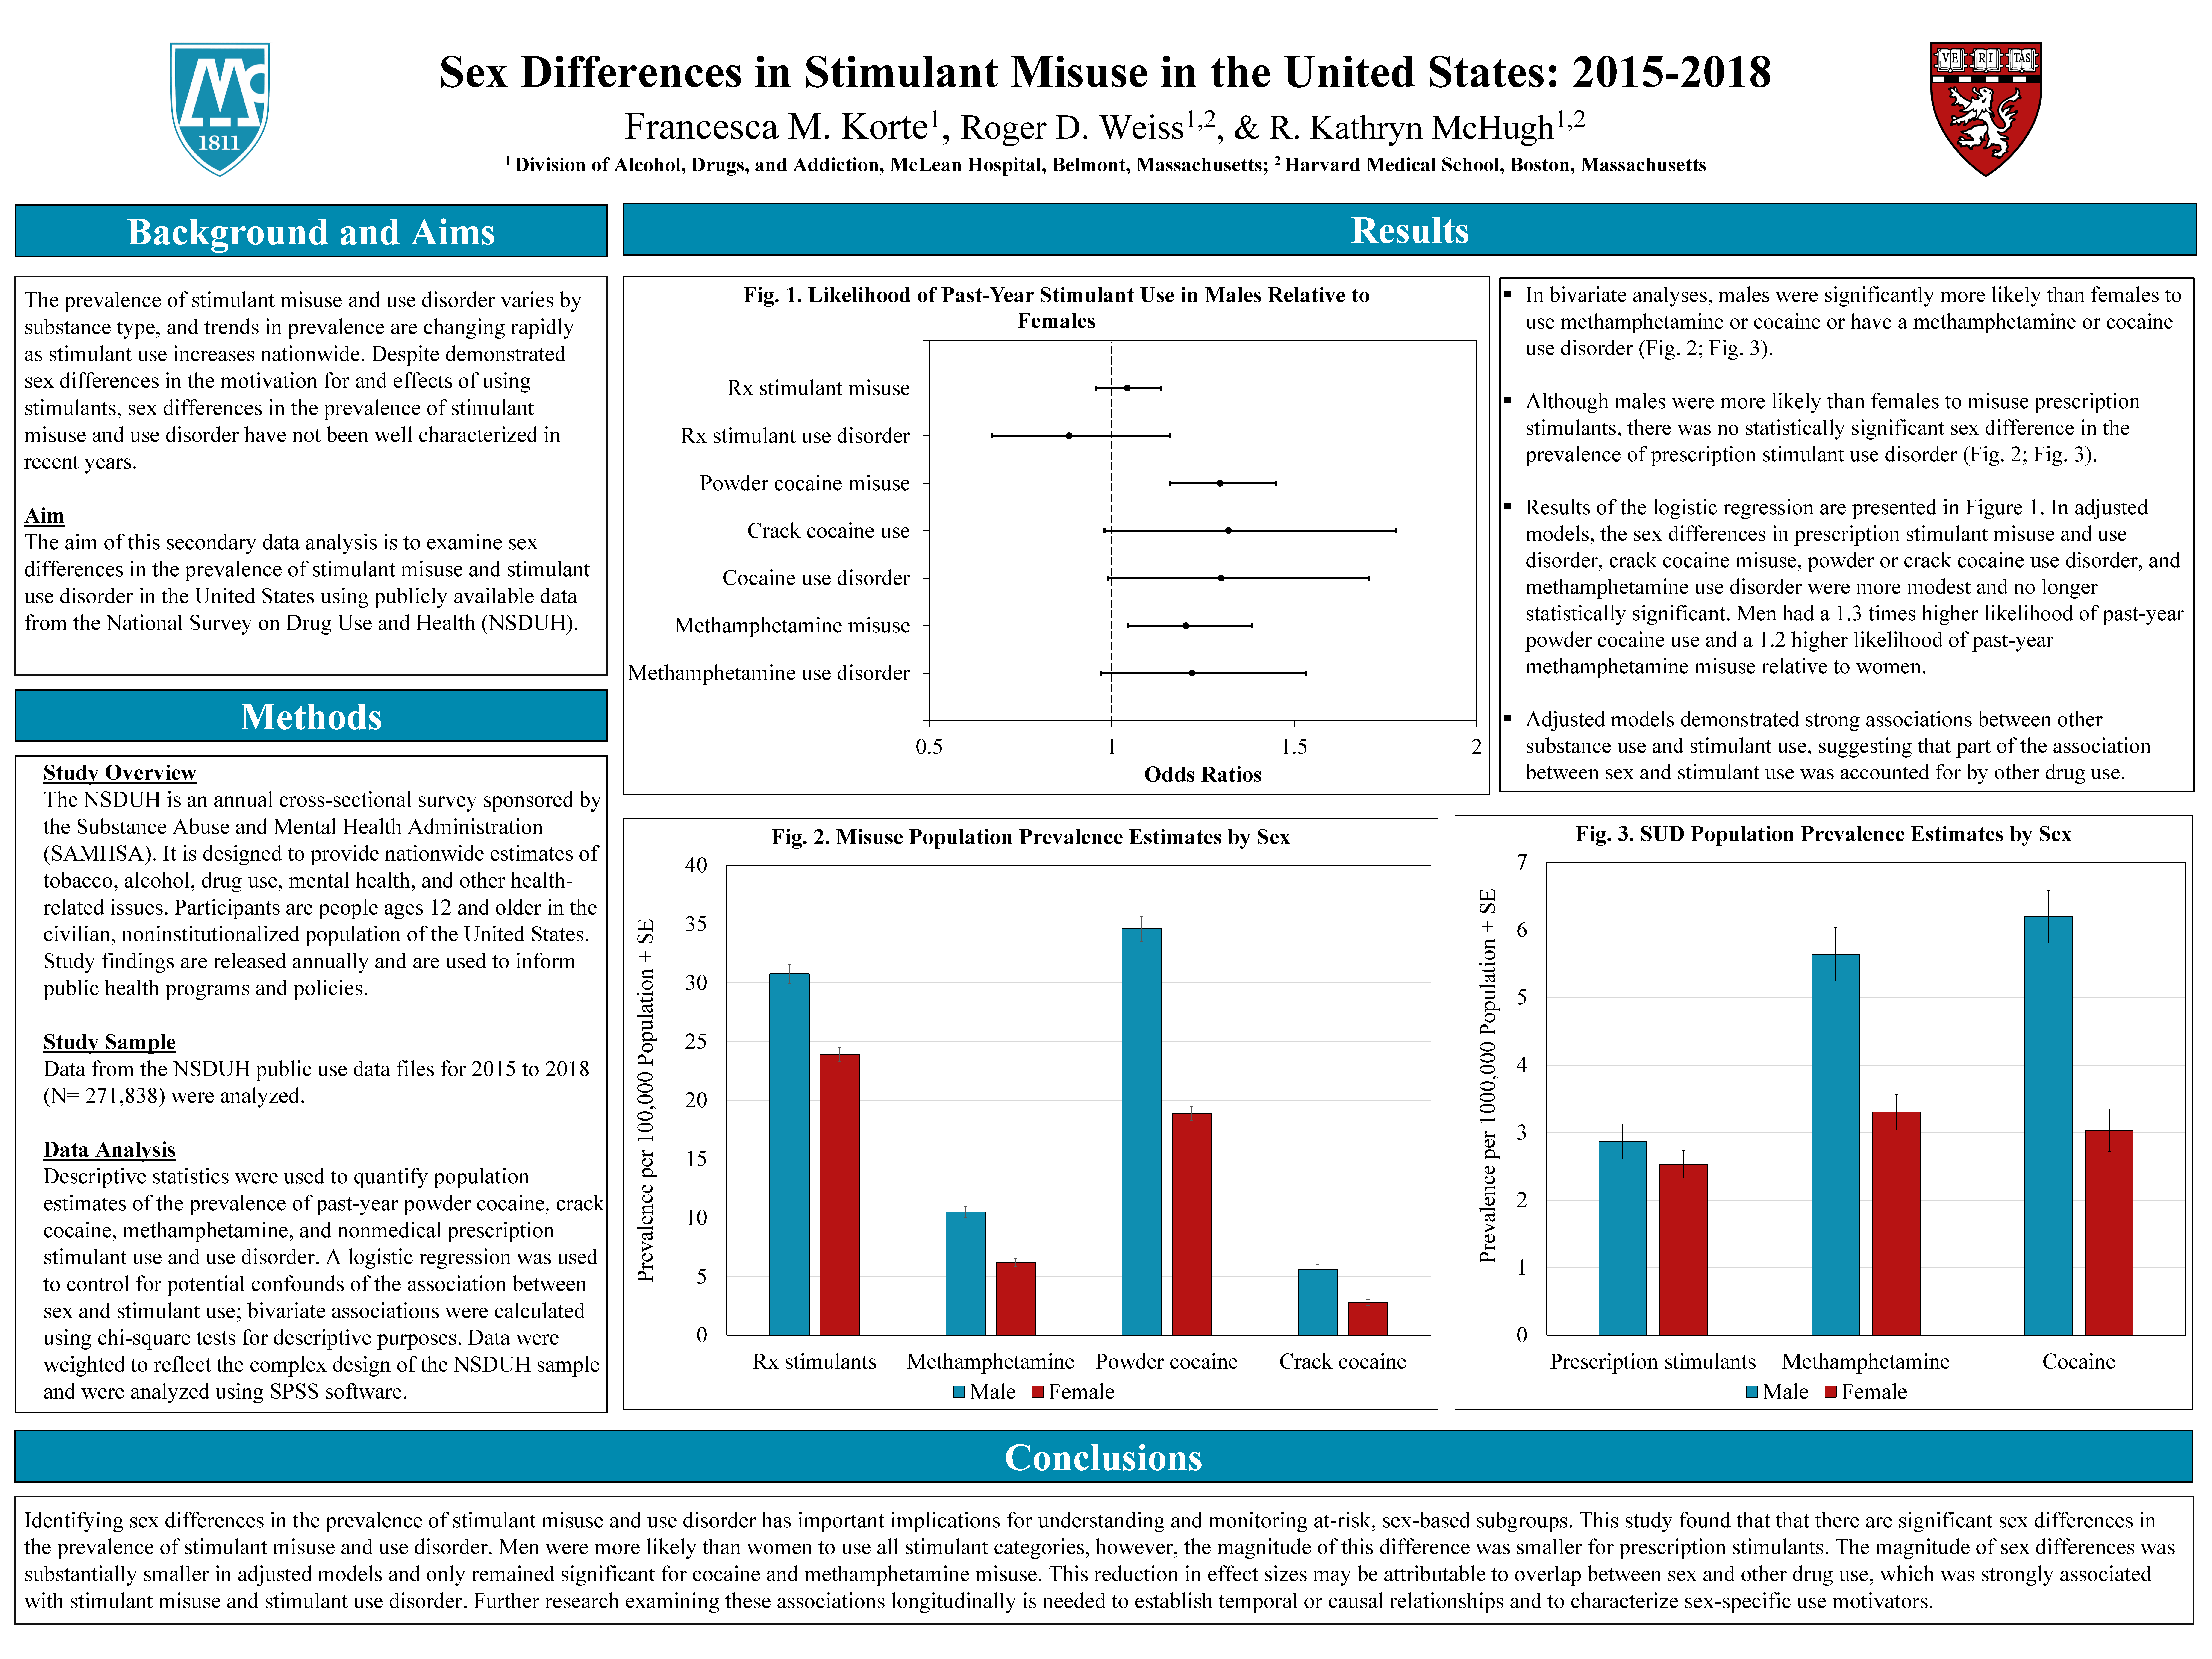 Sex differences in stimulant misuse in the United States: 2015-2018